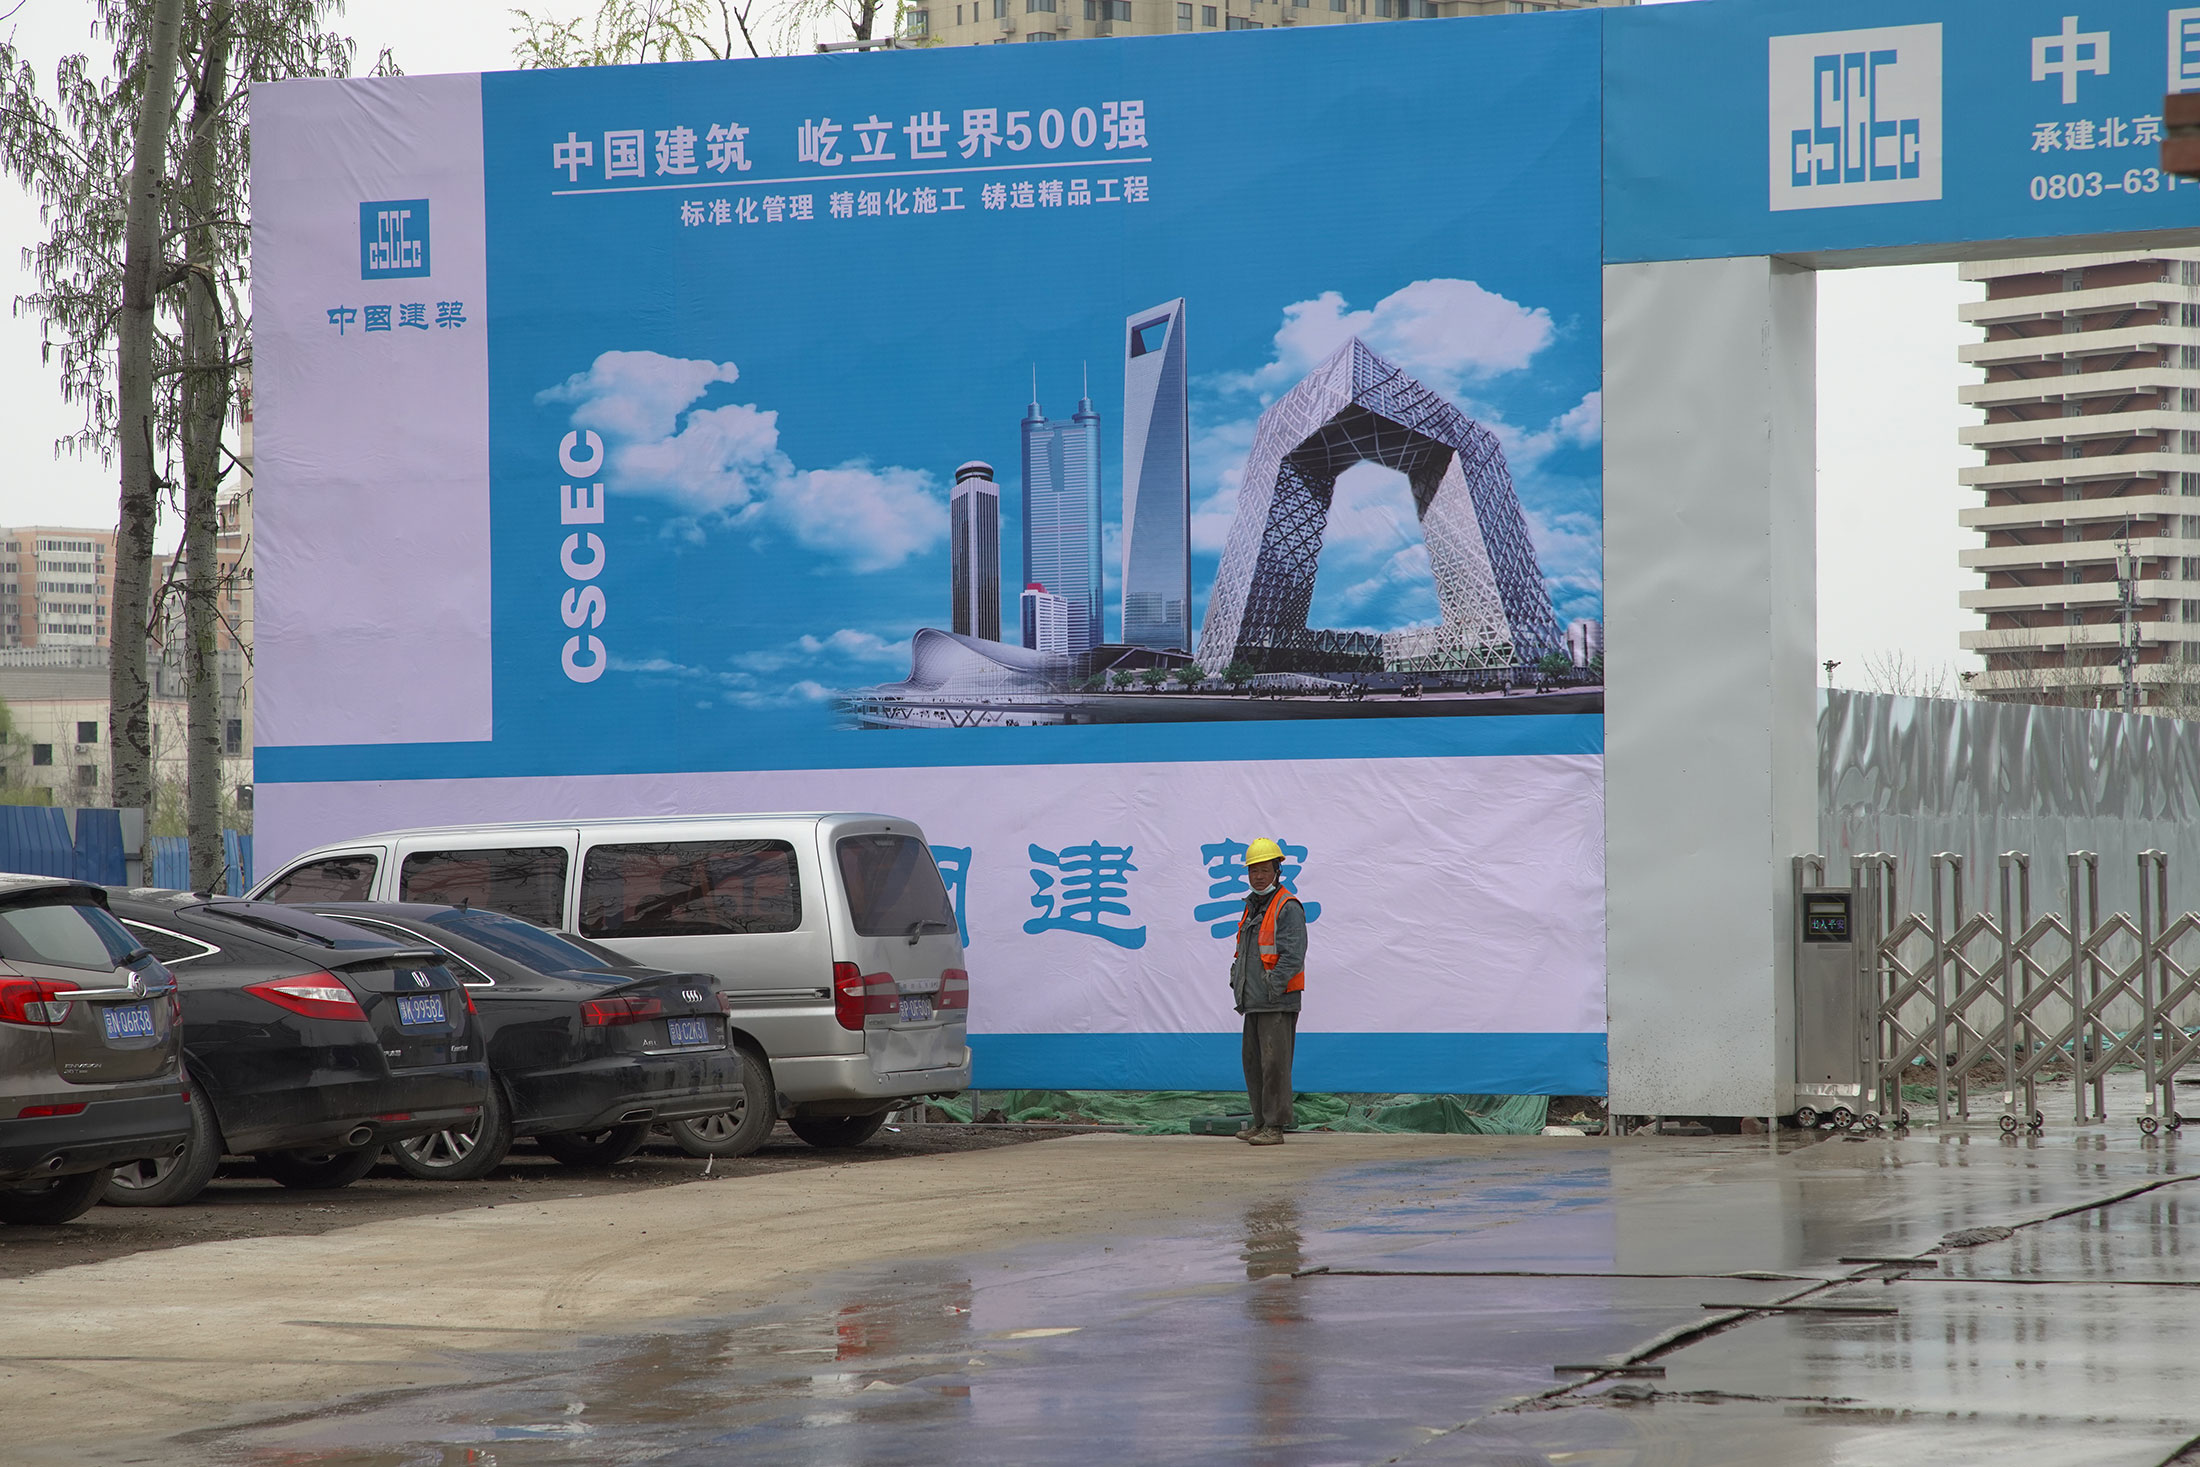 Zhongguancun Science and Technology Park in Beijing is undergoing a large expansion.